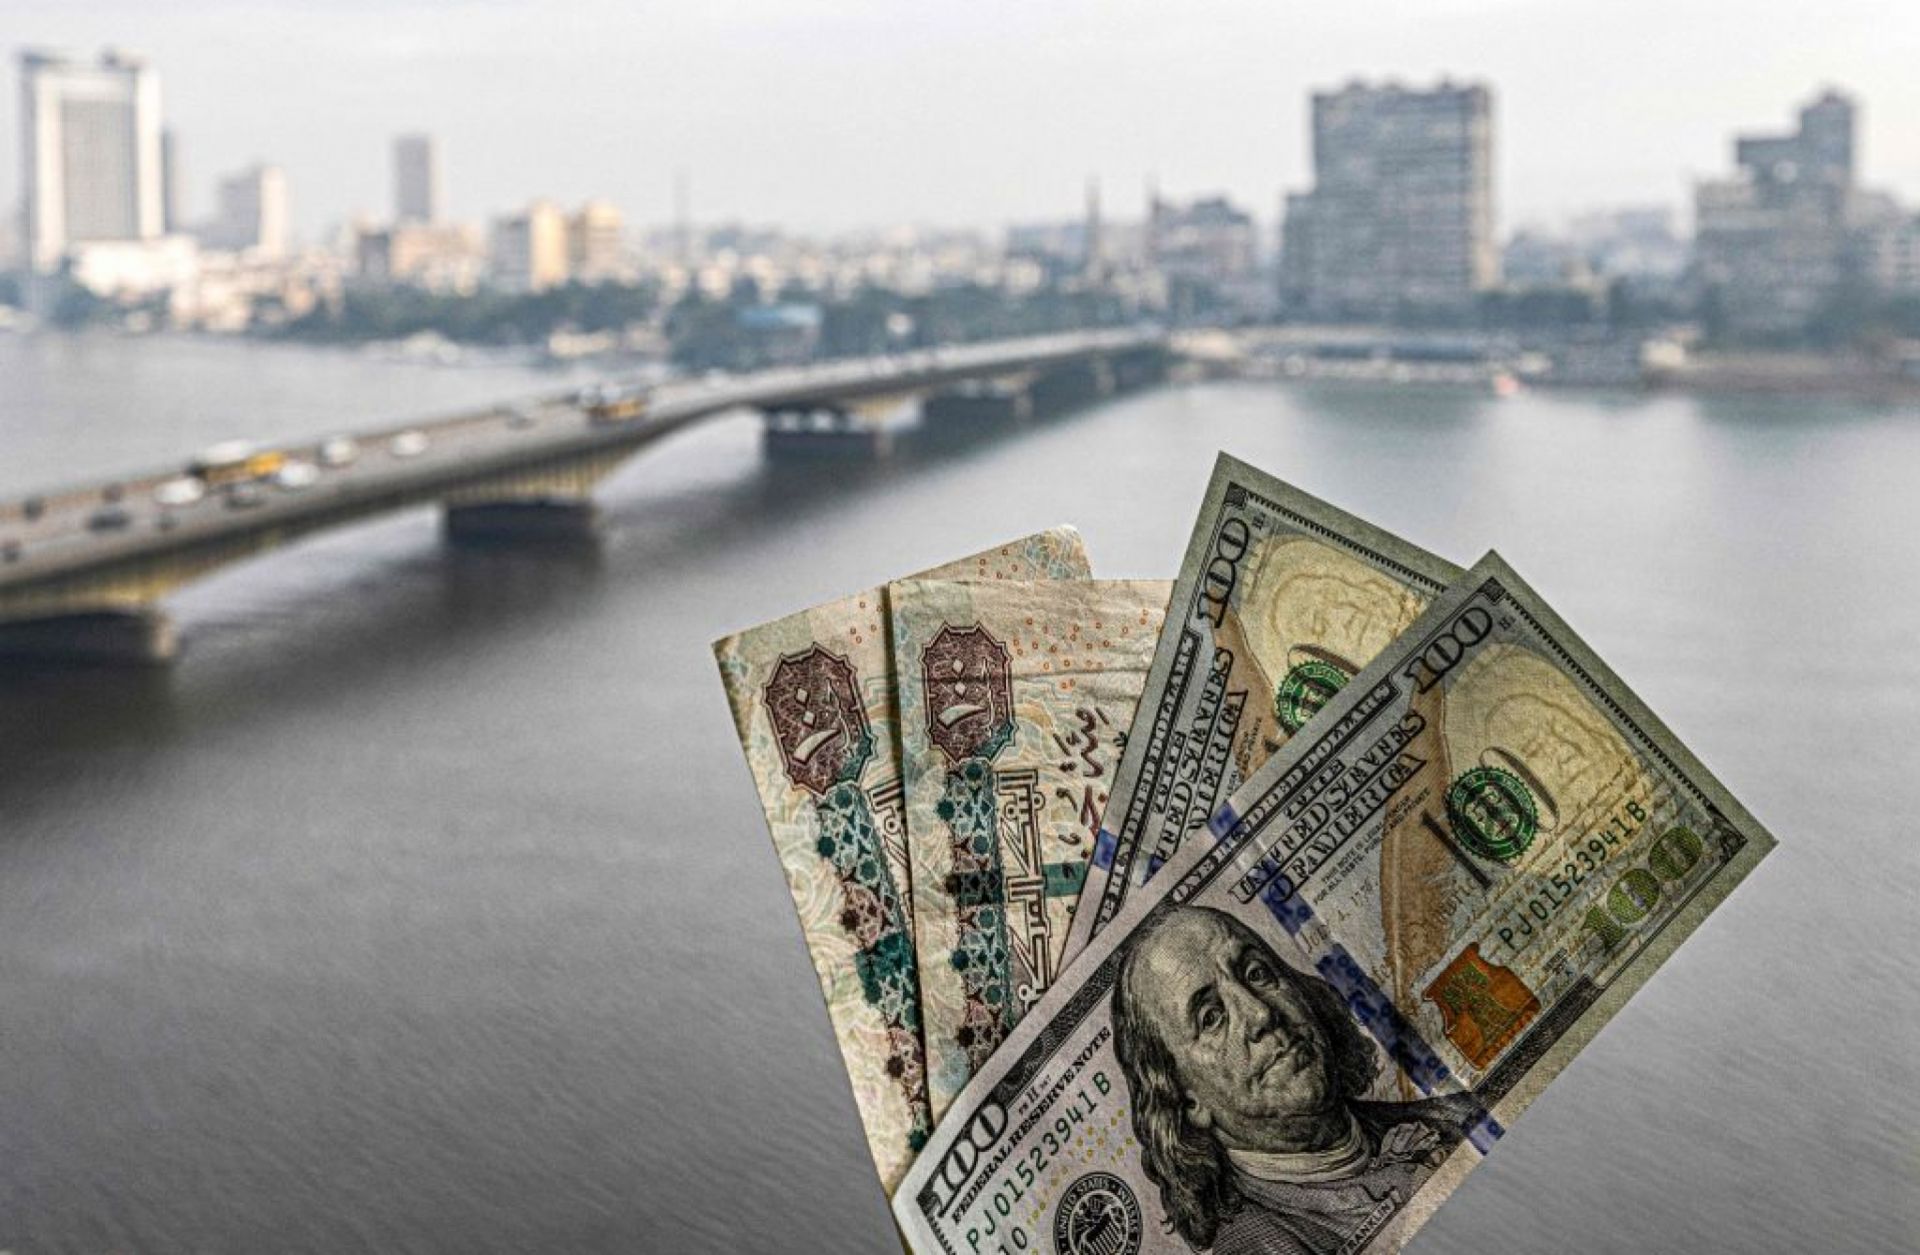 Two pairs of U.S. hundred dollar bills and Egyptian hundred pound notes are held before a window showing the skyline of Egypt's capital Cairo and the Nile River on Jan. 16, 2023.